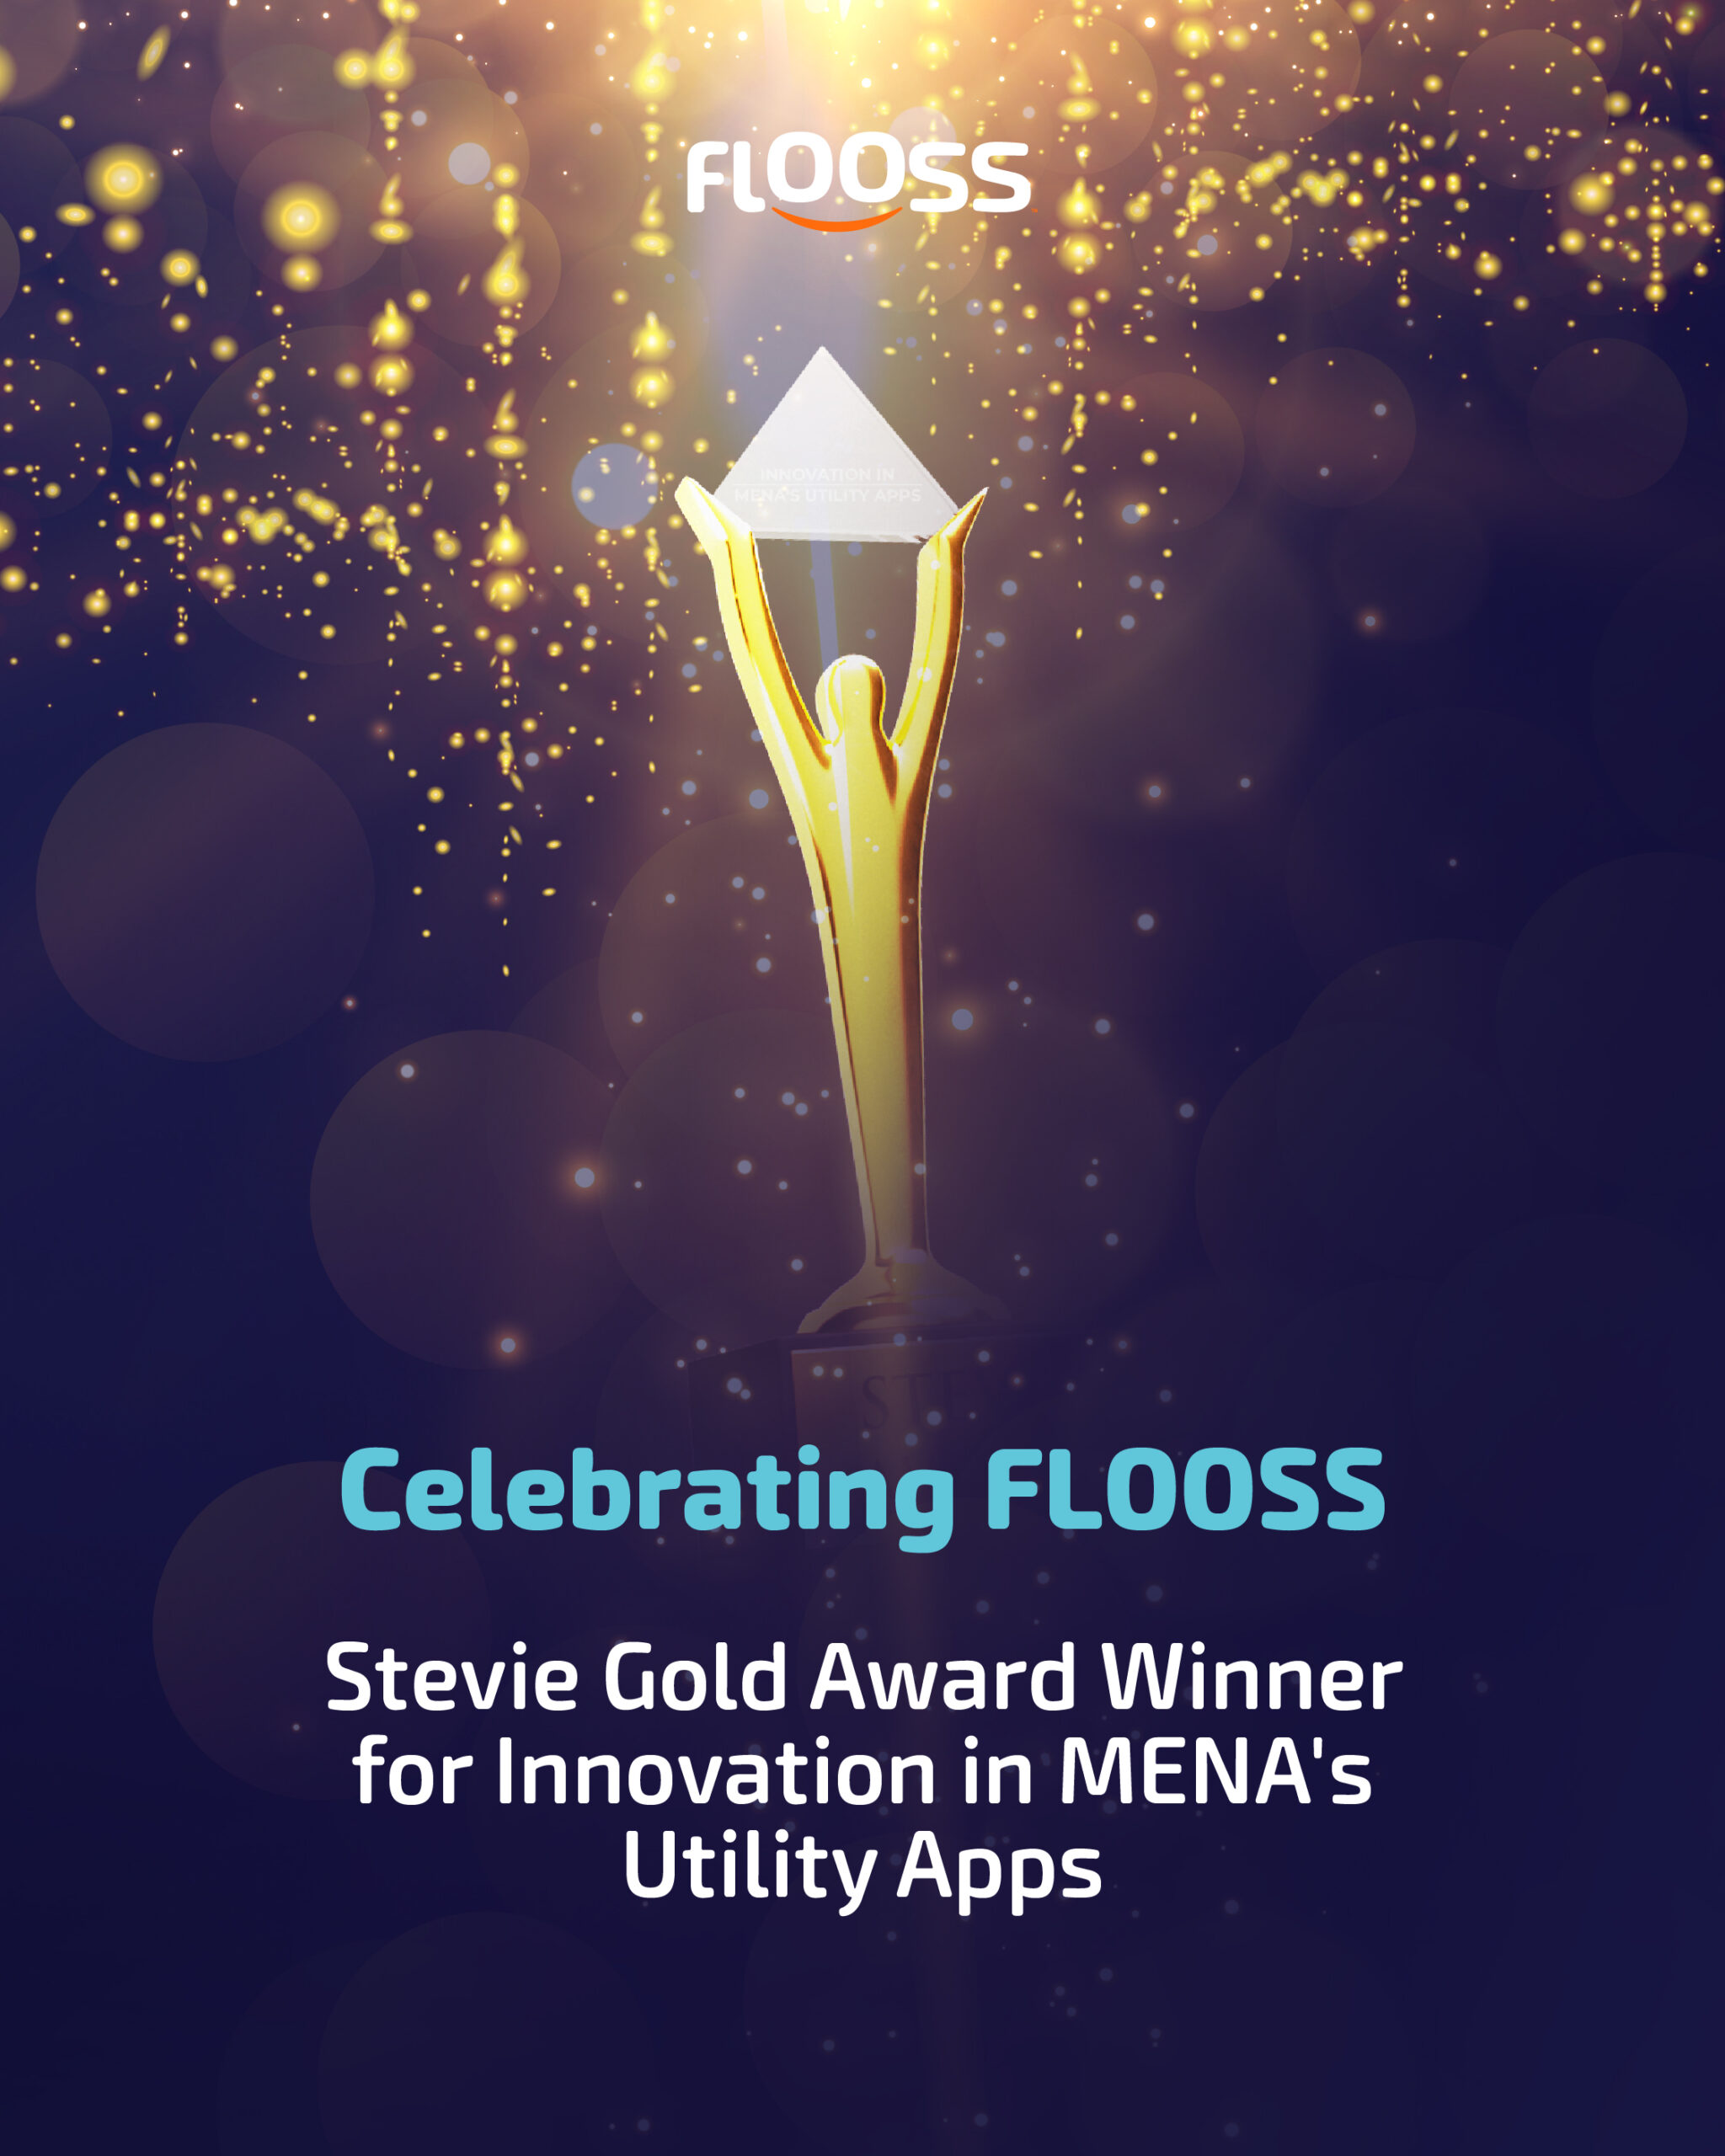 FLOOSS, has been honored with the prestigious Stevie Gold Award in the MENA region!